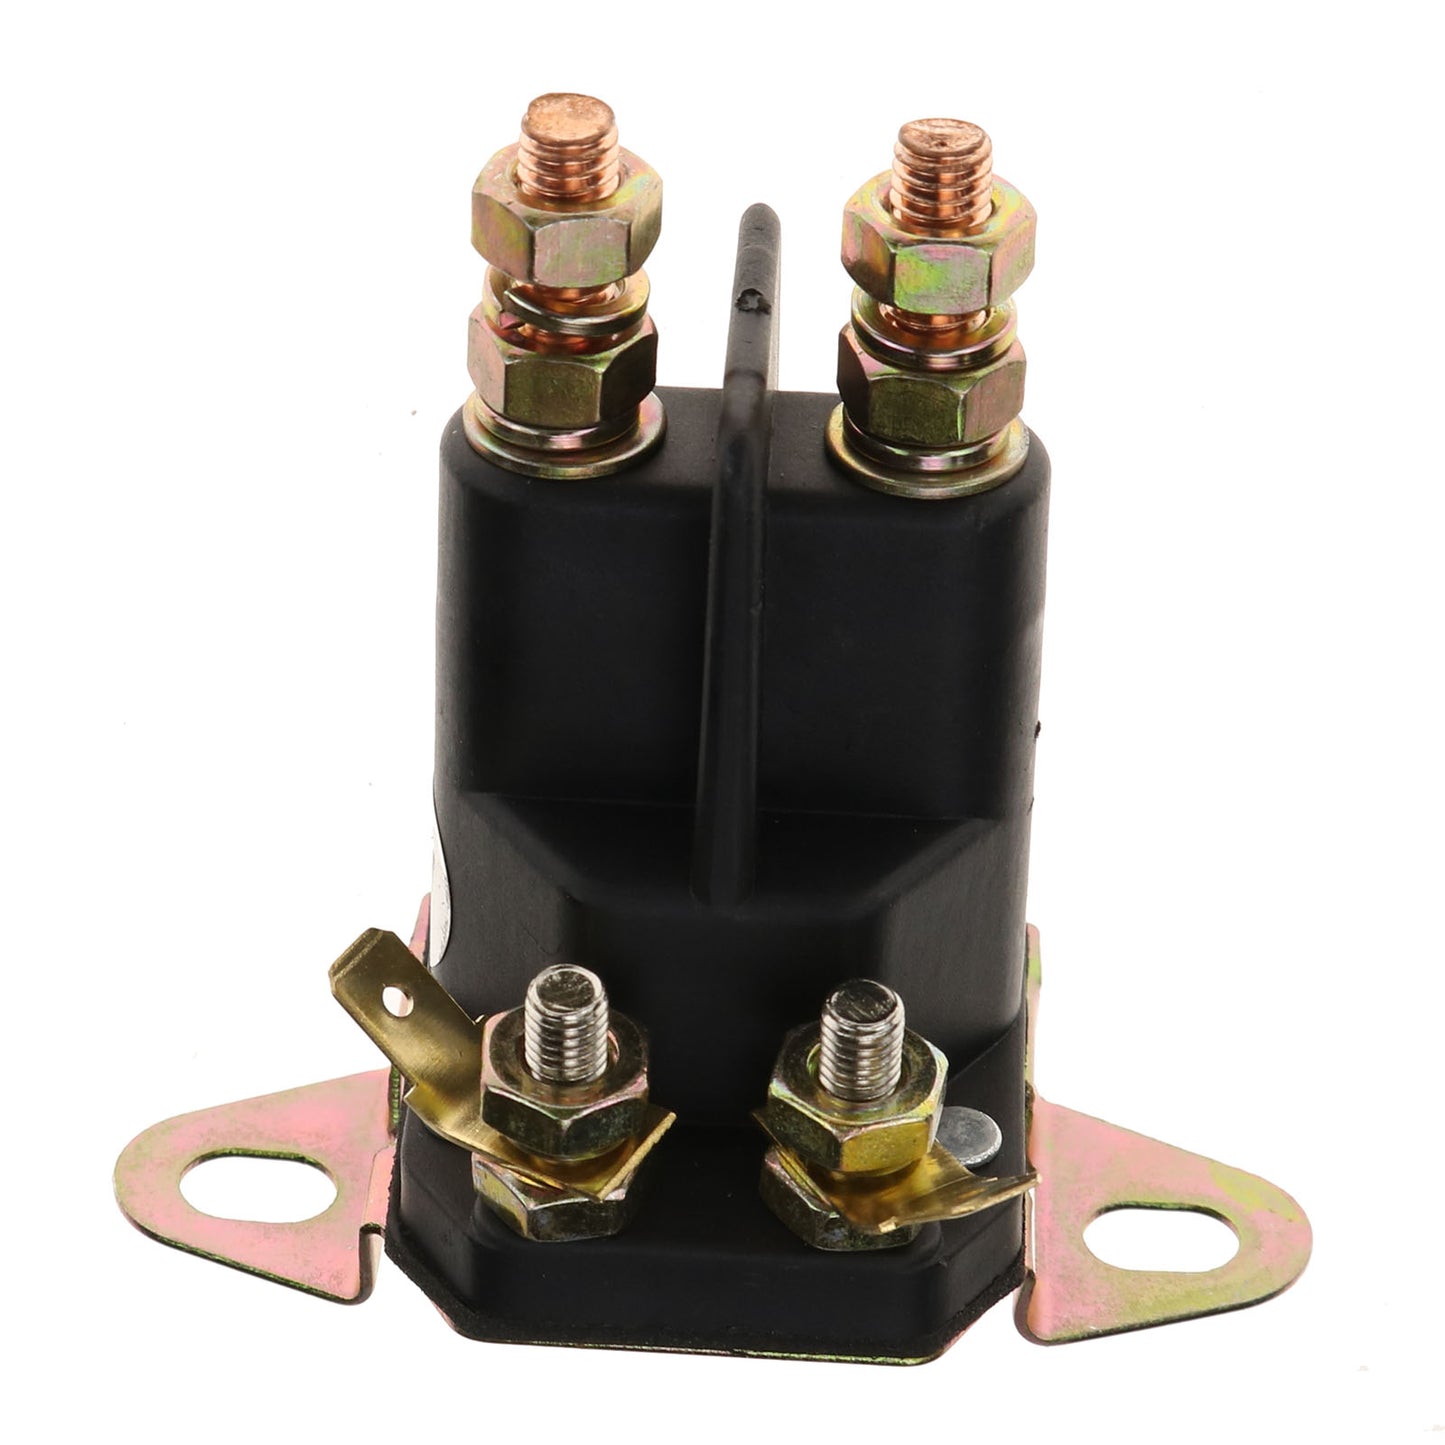 New Starter Solenoid Relay 27010-7007 Compatible with Kawasaki FR651V FR691V FS481V FS600V FX691V FS481V FS600V FS651V FS691V FX600V FX651V FS691V FX600V FX651V FX691V FX730V Engine